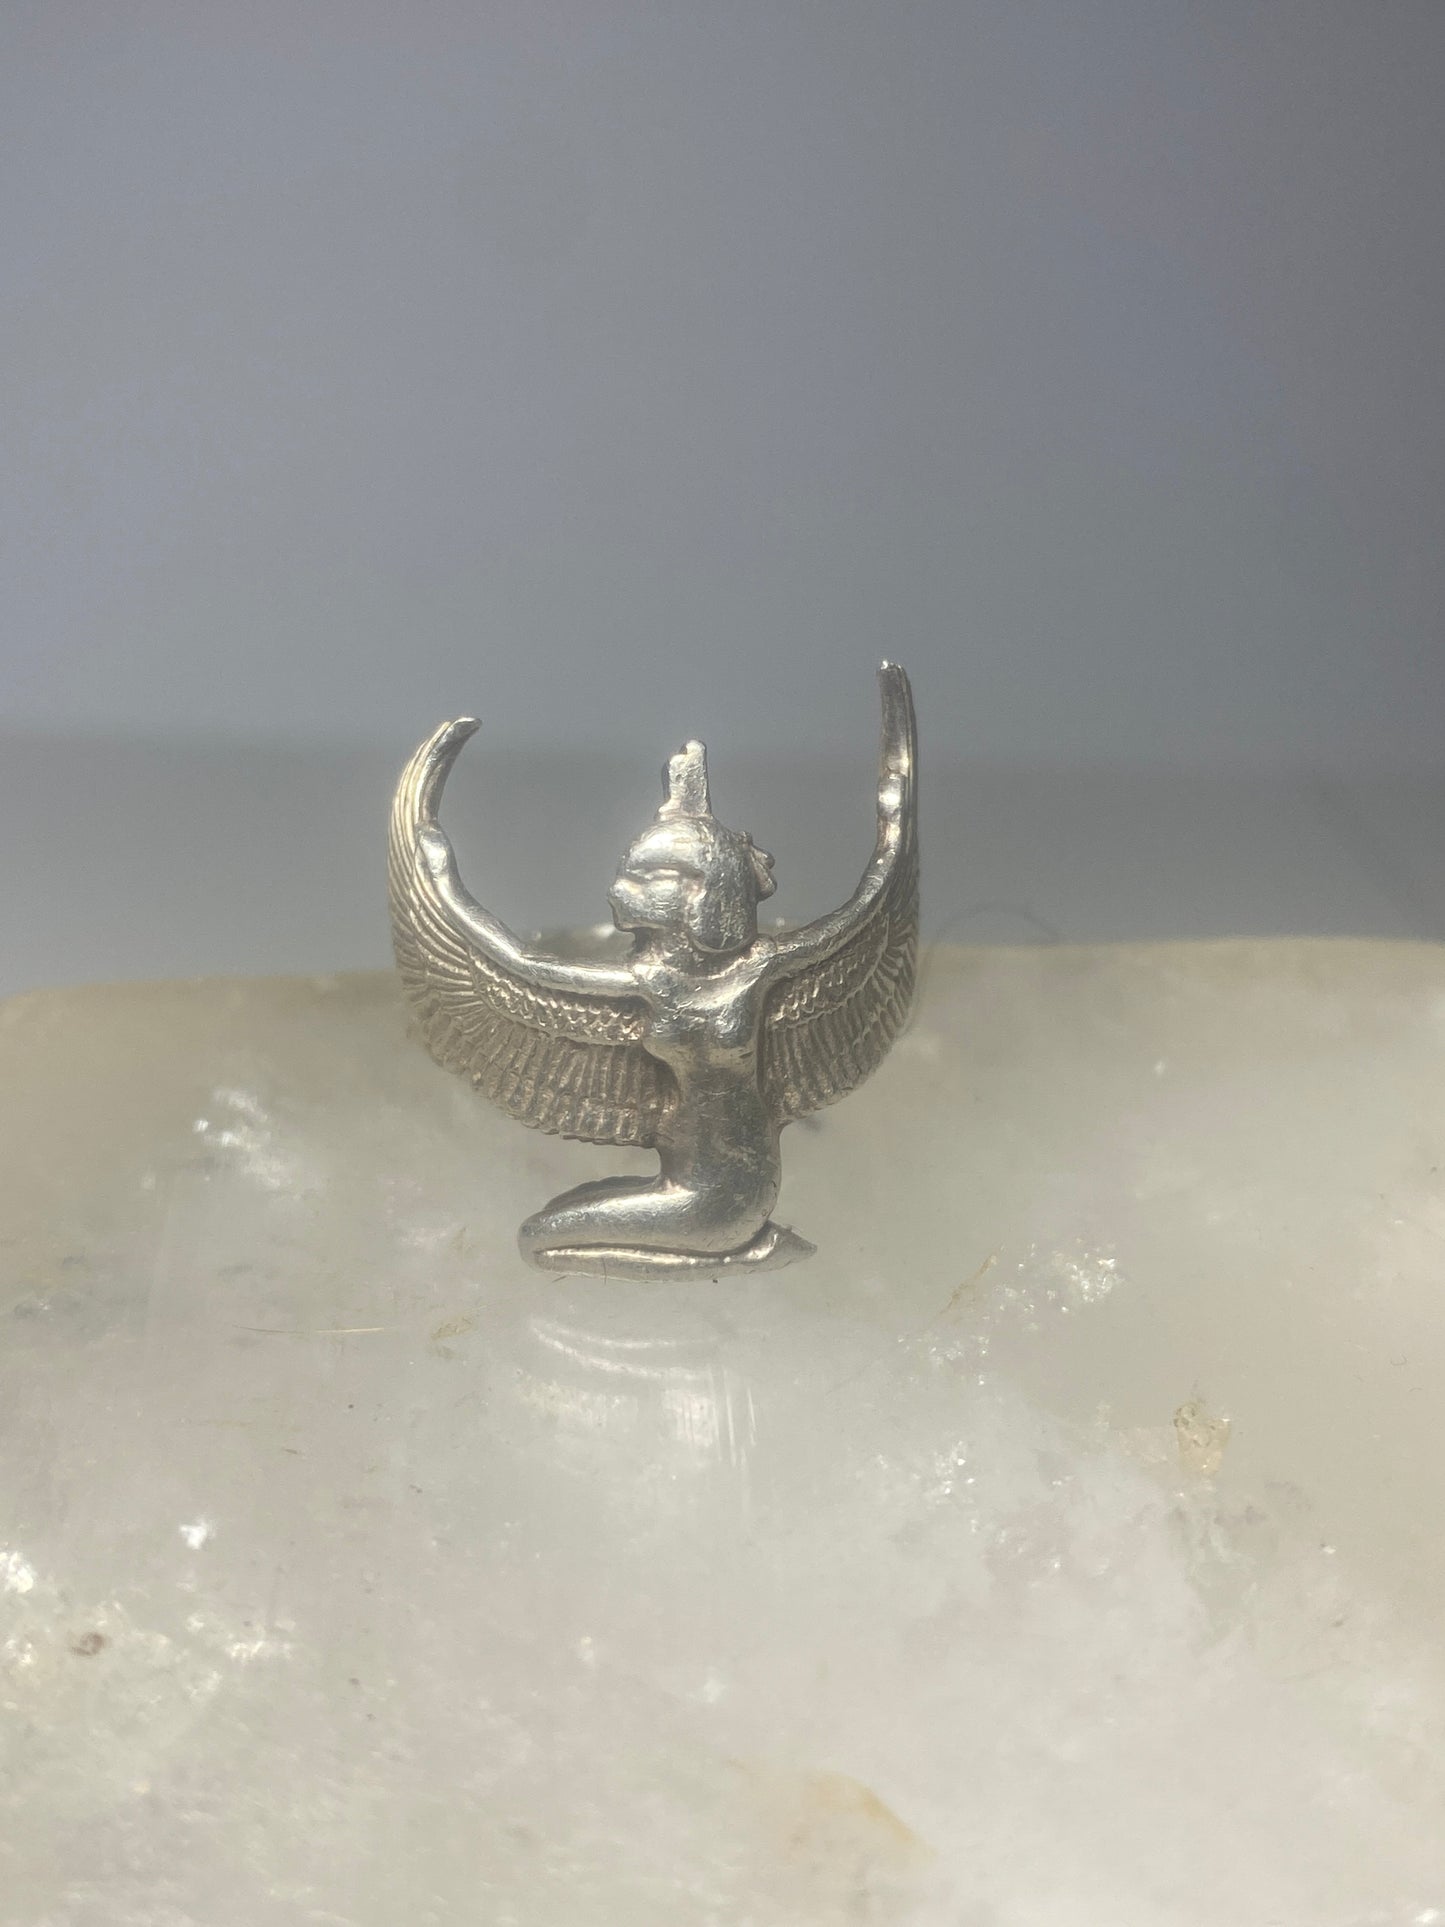 Isis ring winged Egyptian sterling silver band goddess band women